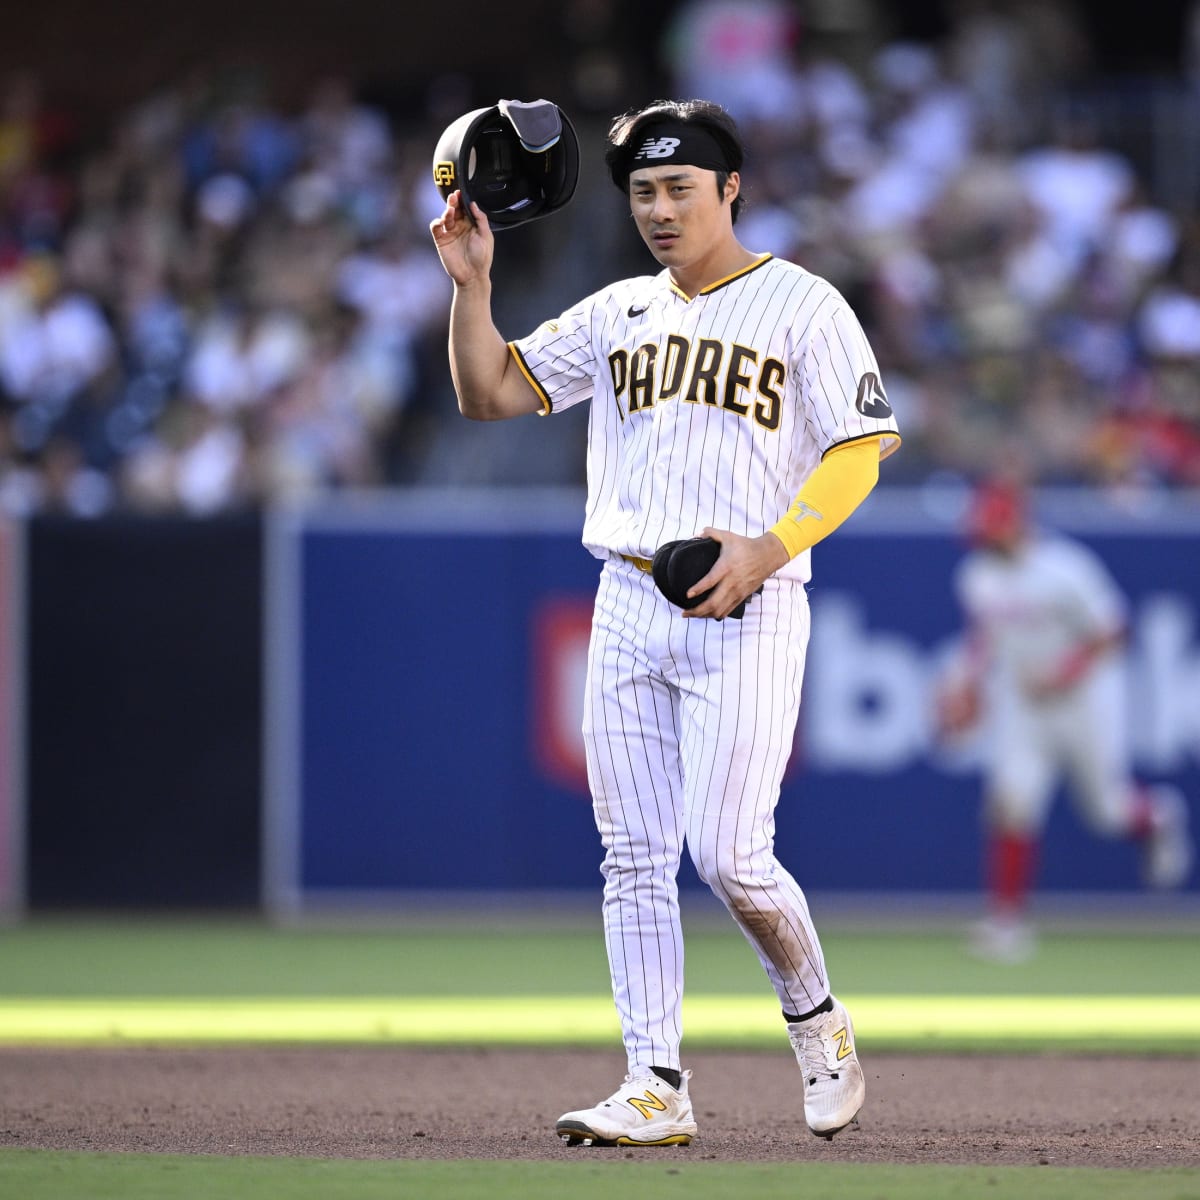 Padres News: Ha Seong Kim Scratched from Sunday's Lineup With Concerning  Abdominal Issue - Sports Illustrated Inside The Padres News, Analysis and  More